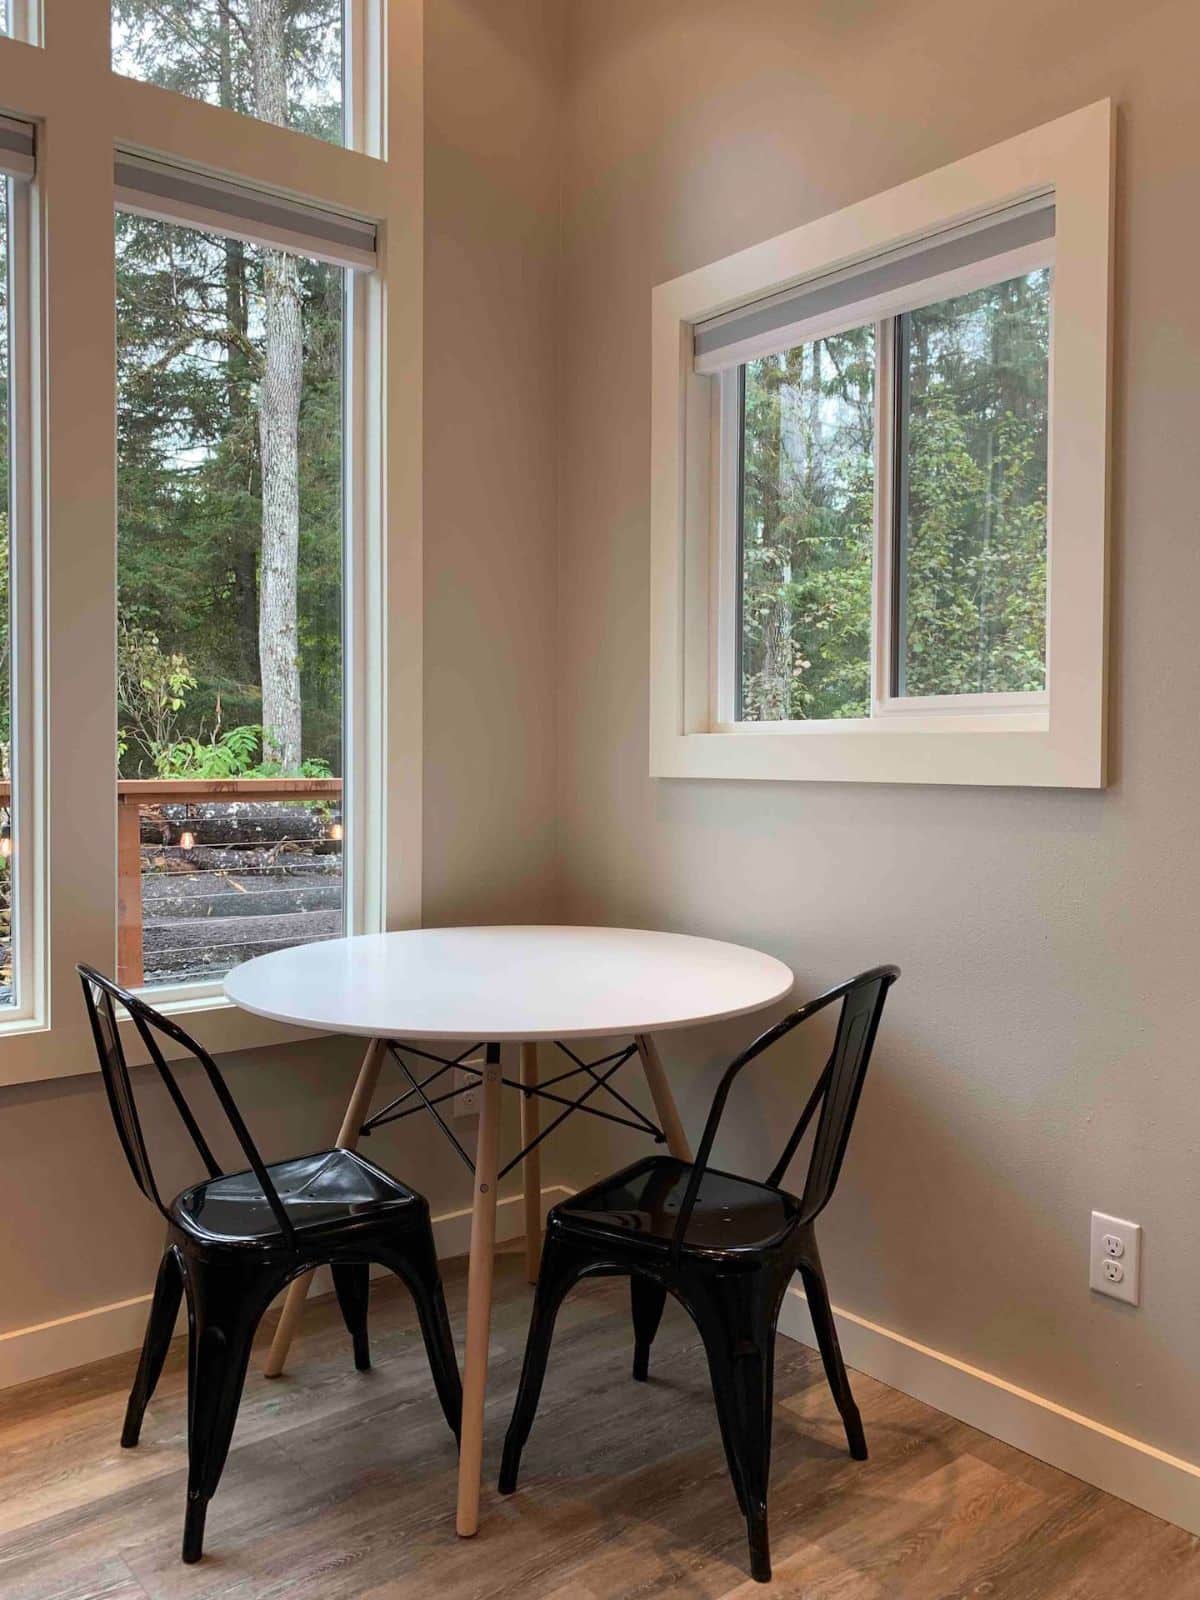 round table with black chairs in corner by windows